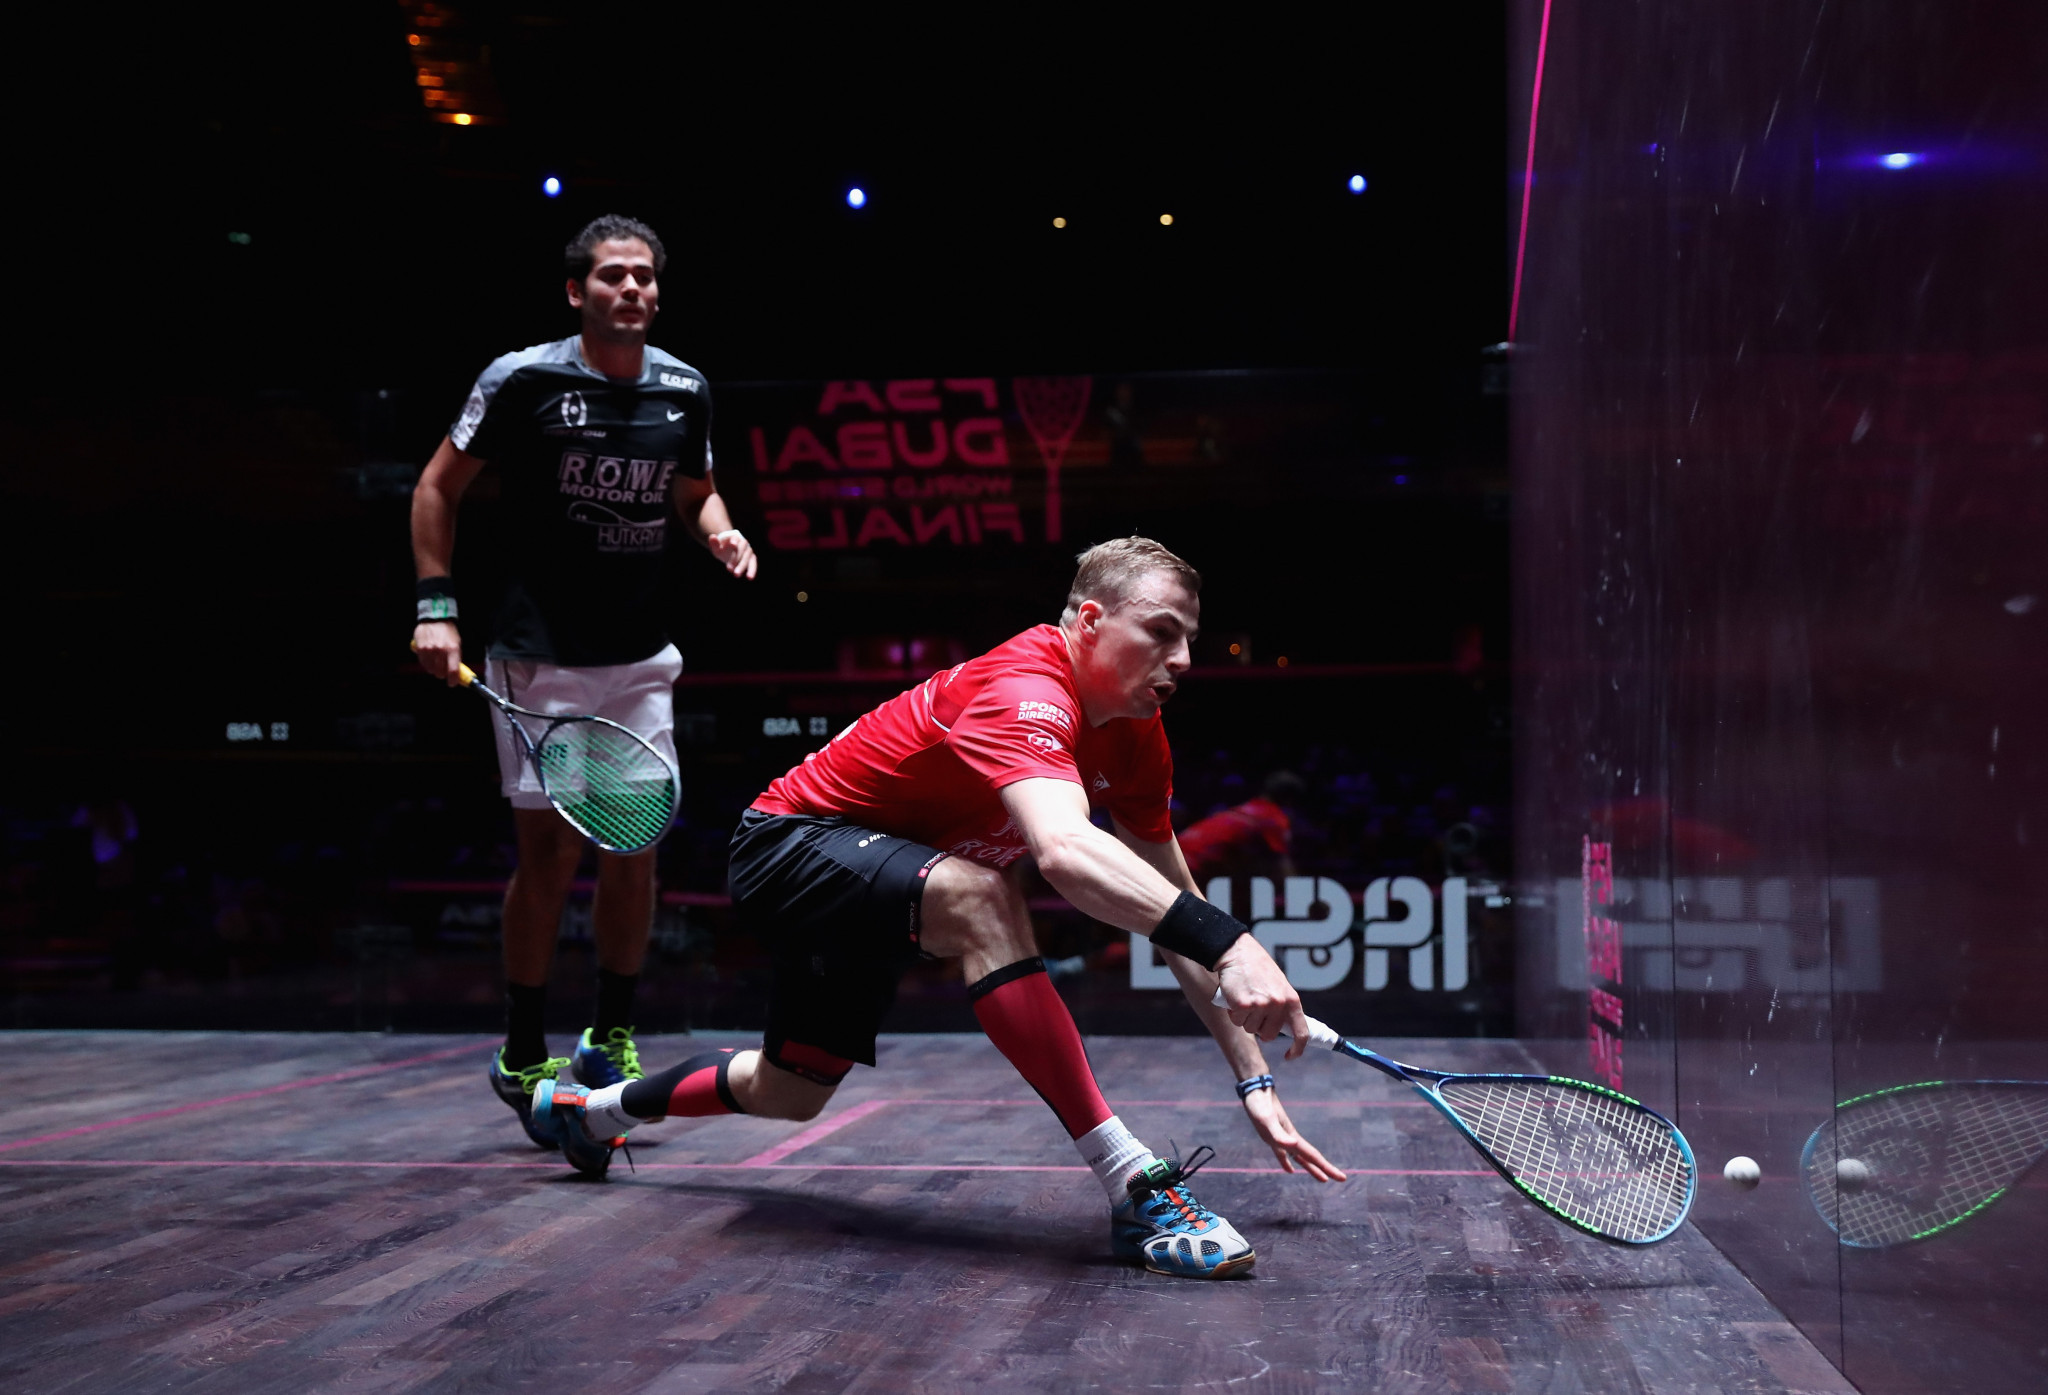 England squash players Matthew and Massaro named top seeds for Gold Coast 2018 